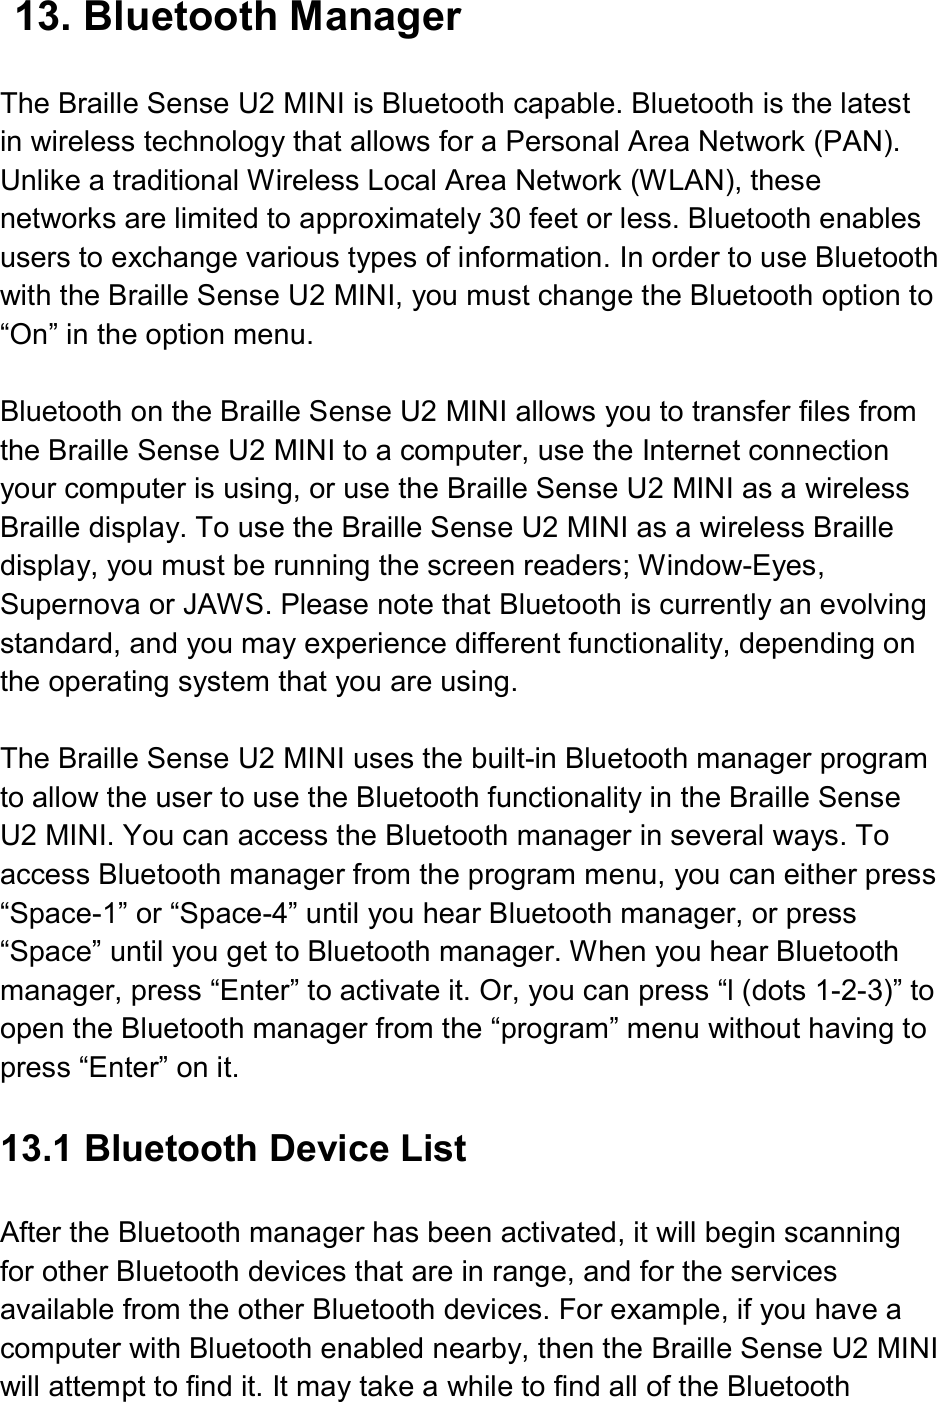  13. Bluetooth Manager  The Braille Sense U2 MINI is Bluetooth capable. Bluetooth is the latest in wireless technology that allows for a Personal Area Network (PAN). Unlike a traditional Wireless Local Area Network (WLAN), these networks are limited to approximately 30 feet or less. Bluetooth enables users to exchange various types of information. In order to use Bluetooth with the Braille Sense U2 MINI, you must change the Bluetooth option to “On” in the option menu.    Bluetooth on the Braille Sense U2 MINI allows you to transfer files from the Braille Sense U2 MINI to a computer, use the Internet connection your computer is using, or use the Braille Sense U2 MINI as a wireless Braille display. To use the Braille Sense U2 MINI as a wireless Braille display, you must be running the screen readers; Window-Eyes, Supernova or JAWS. Please note that Bluetooth is currently an evolving standard, and you may experience different functionality, depending on the operating system that you are using.  The Braille Sense U2 MINI uses the built-in Bluetooth manager program to allow the user to use the Bluetooth functionality in the Braille Sense U2 MINI. You can access the Bluetooth manager in several ways. To access Bluetooth manager from the program menu, you can either press “Space-1” or “Space-4” until you hear Bluetooth manager, or press “Space” until you get to Bluetooth manager. When you hear Bluetooth manager, press “Enter” to activate it. Or, you can press “l (dots 1-2-3)” to open the Bluetooth manager from the “program” menu without having to press “Enter” on it.  13.1 Bluetooth Device List  After the Bluetooth manager has been activated, it will begin scanning for other Bluetooth devices that are in range, and for the services available from the other Bluetooth devices. For example, if you have a computer with Bluetooth enabled nearby, then the Braille Sense U2 MINI will attempt to find it. It may take a while to find all of the Bluetooth 